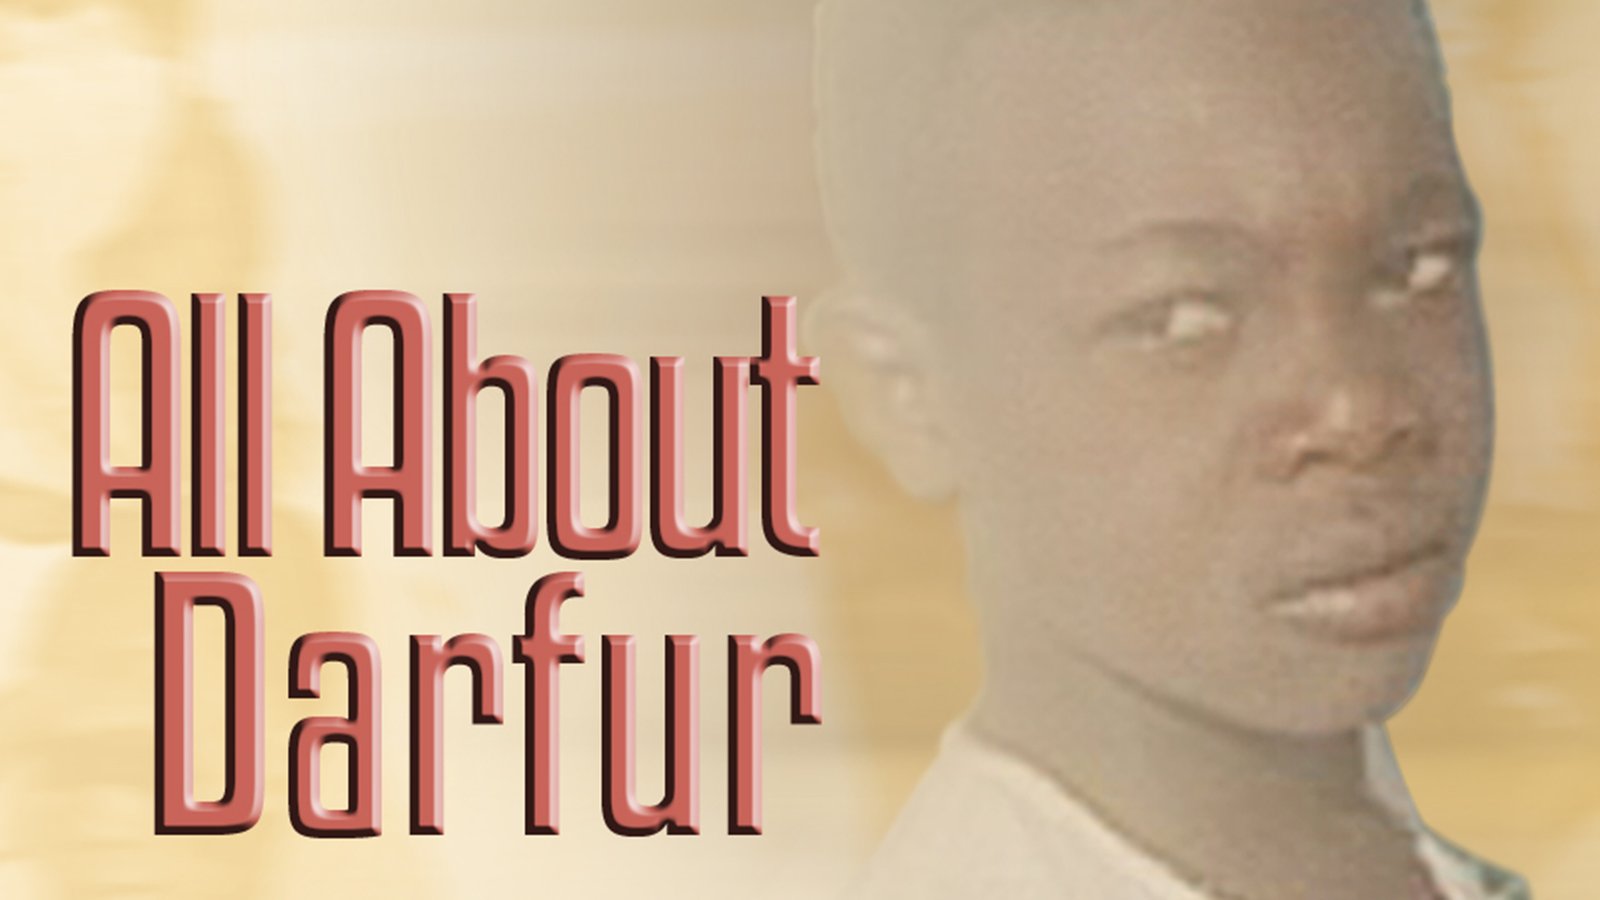 All About Darfur - War and Destruction Through the Eyes of Sudanese Citizens